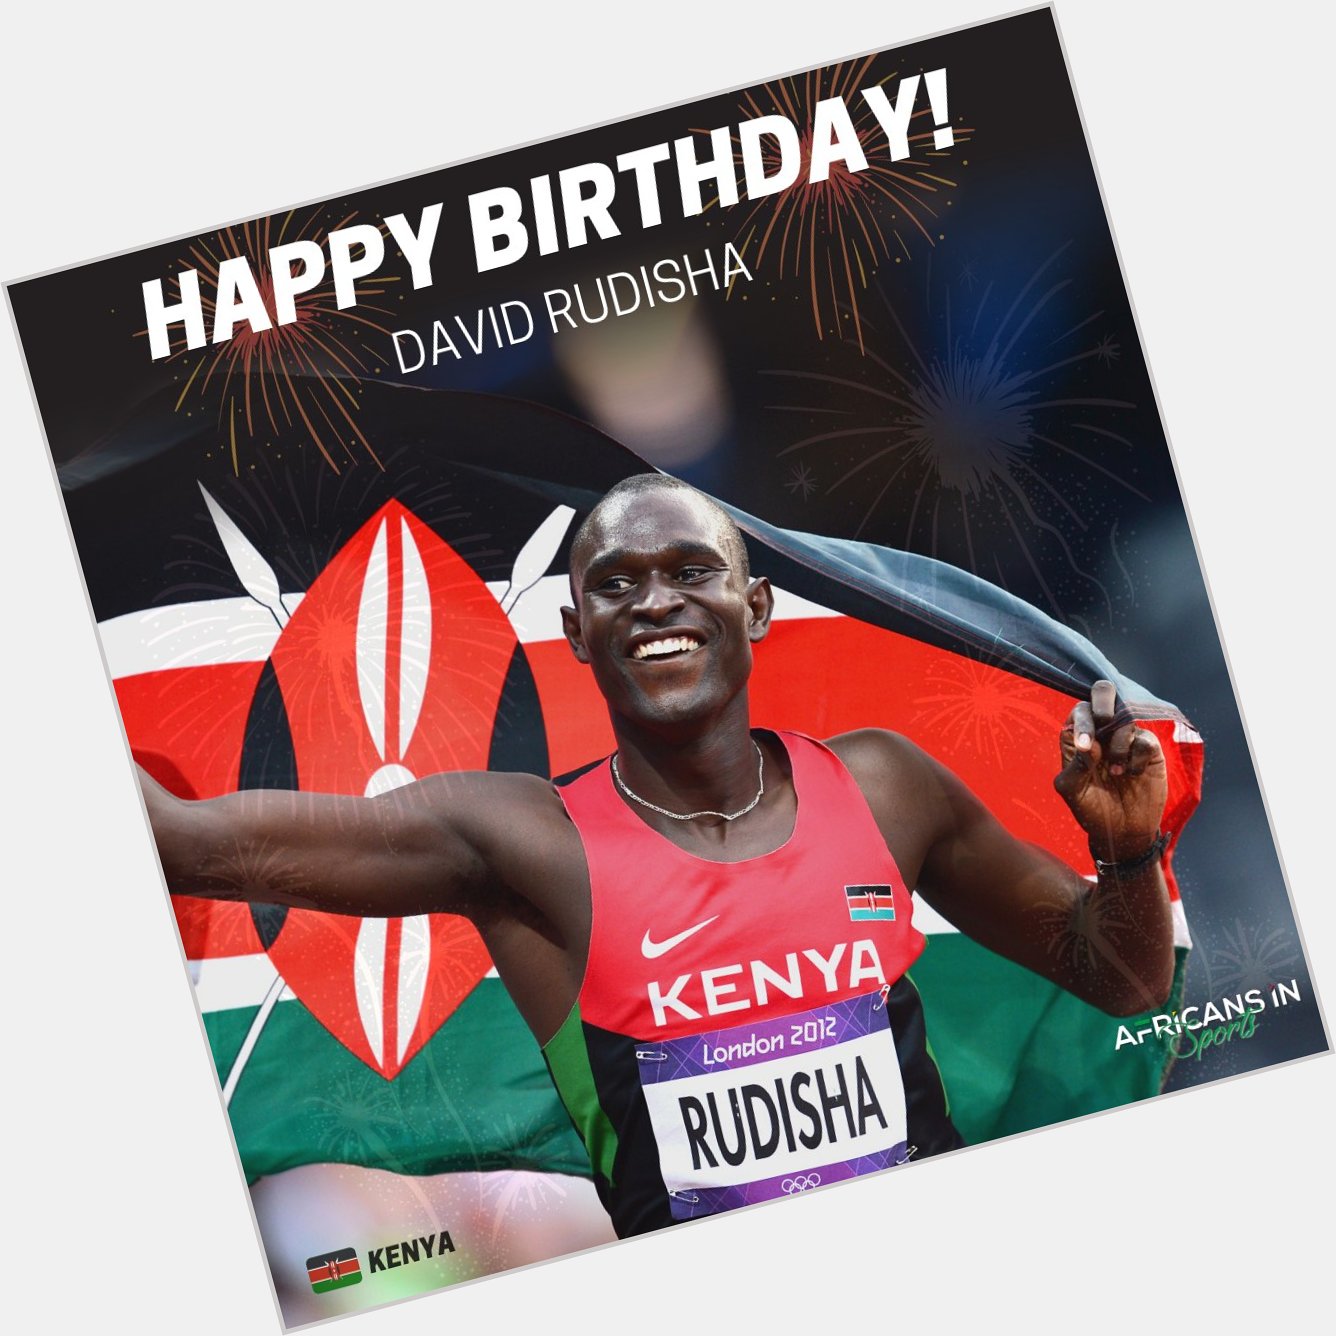 Happy Birthday to Kenyan middle-distance runner, David Rudisha  -
Send him some love via the comment section 